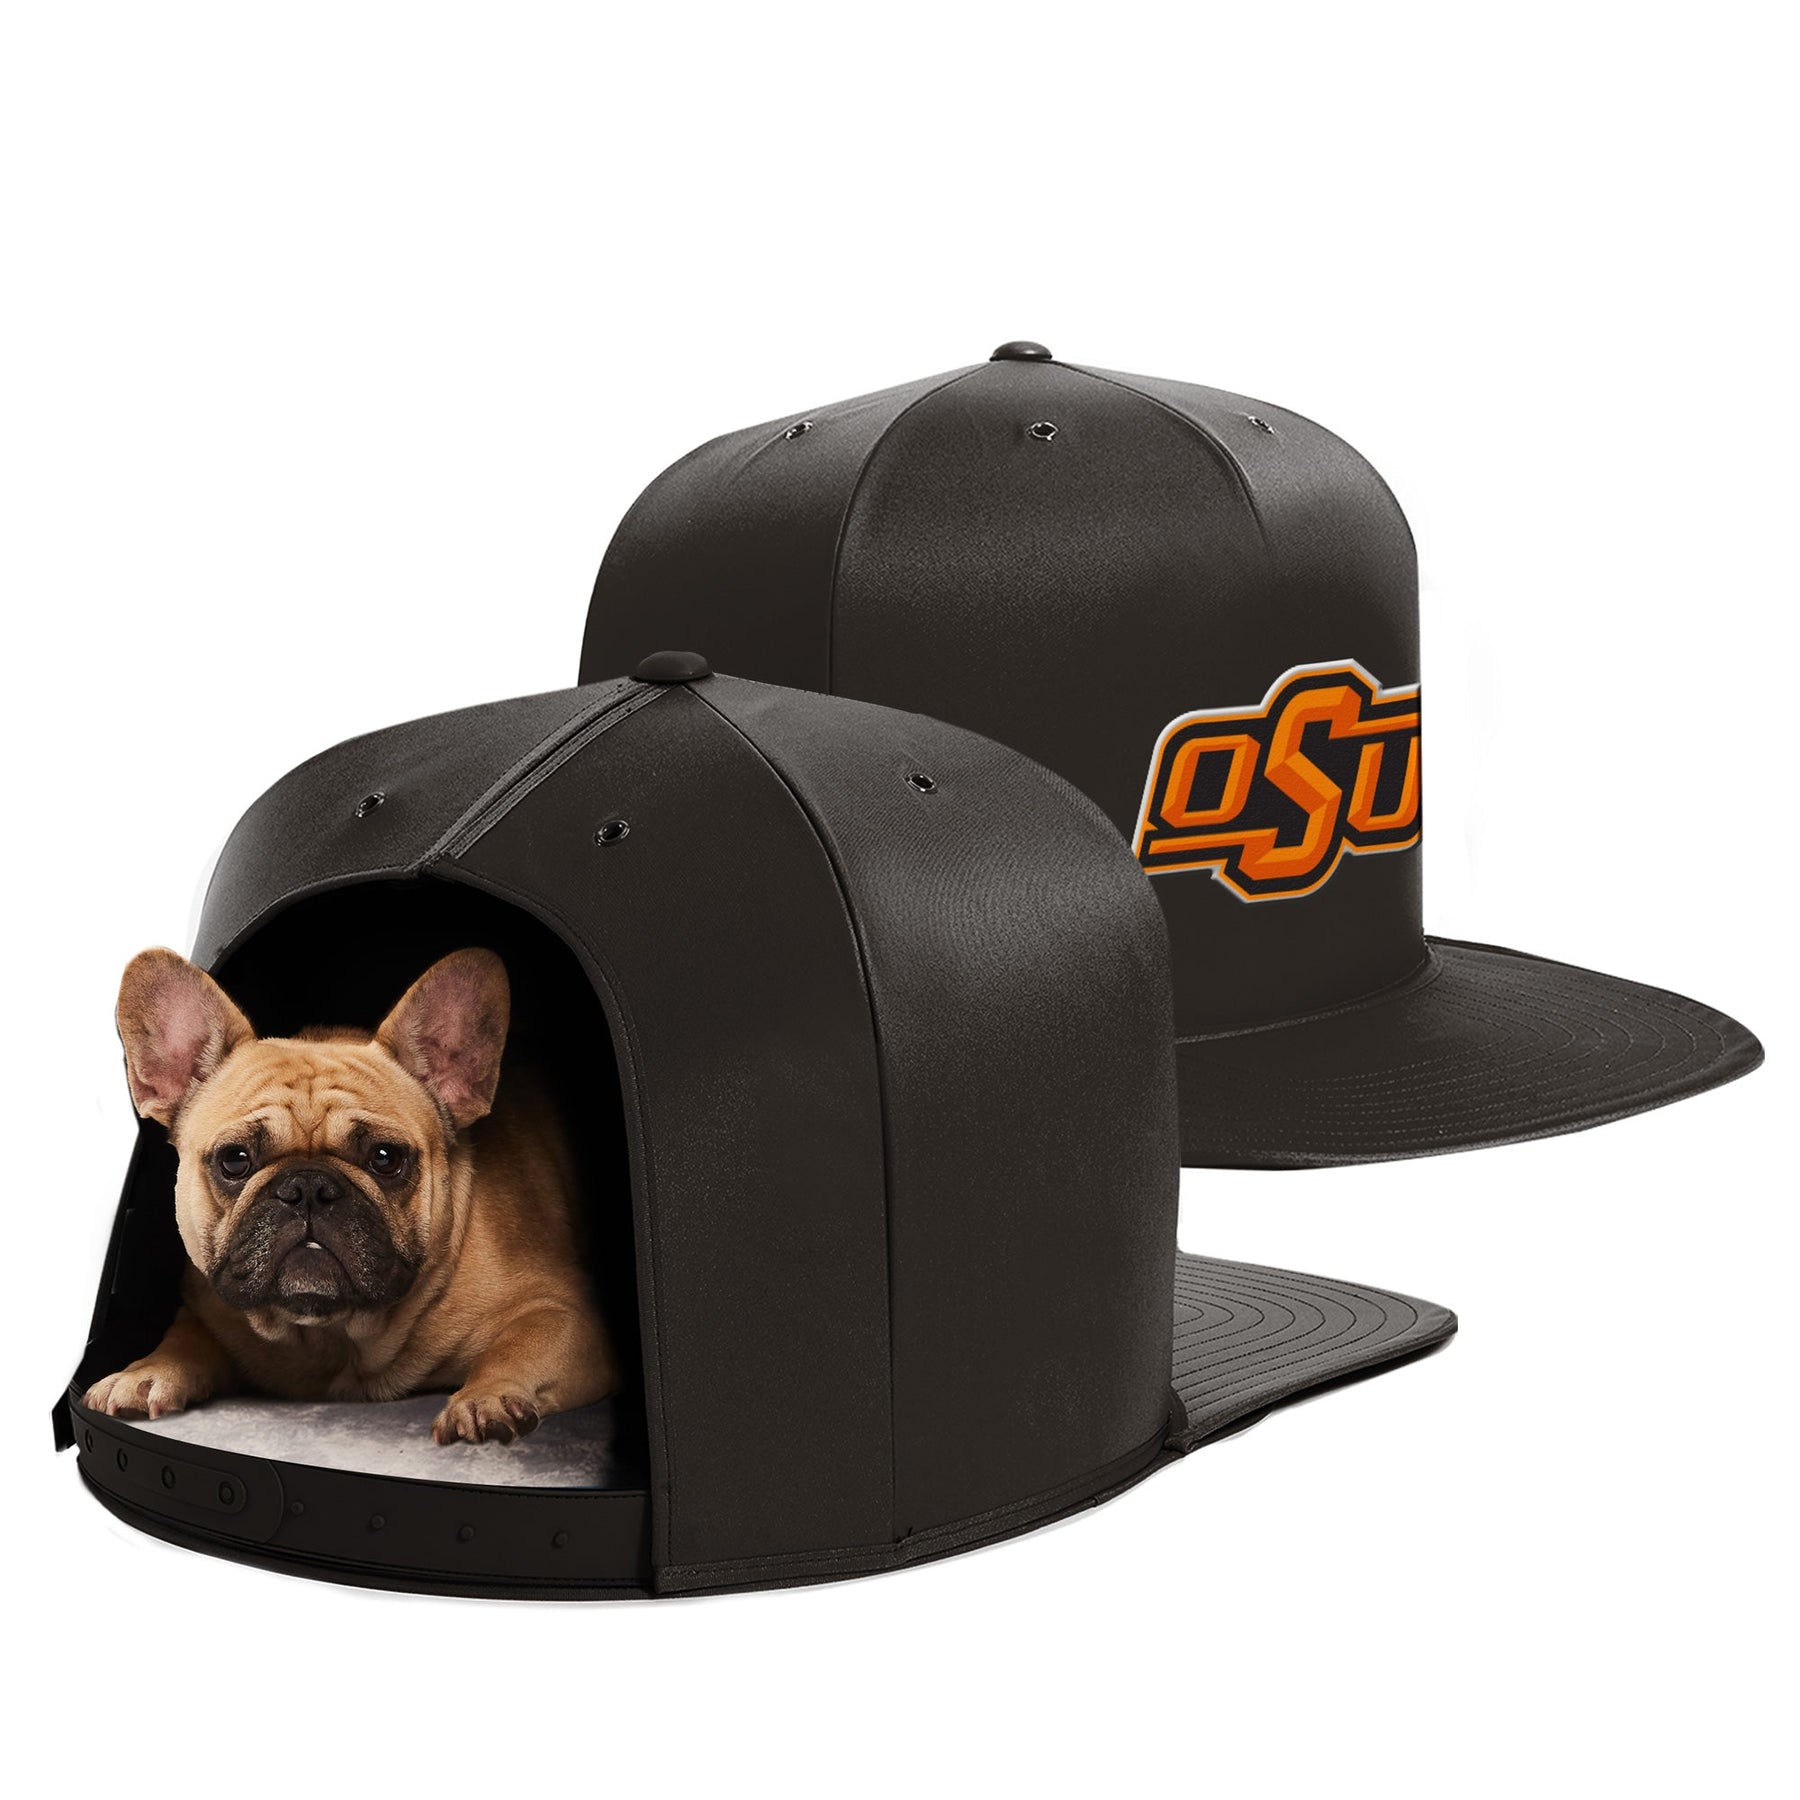 Nap Cap OSU Dog Bed - Southern Agriculture